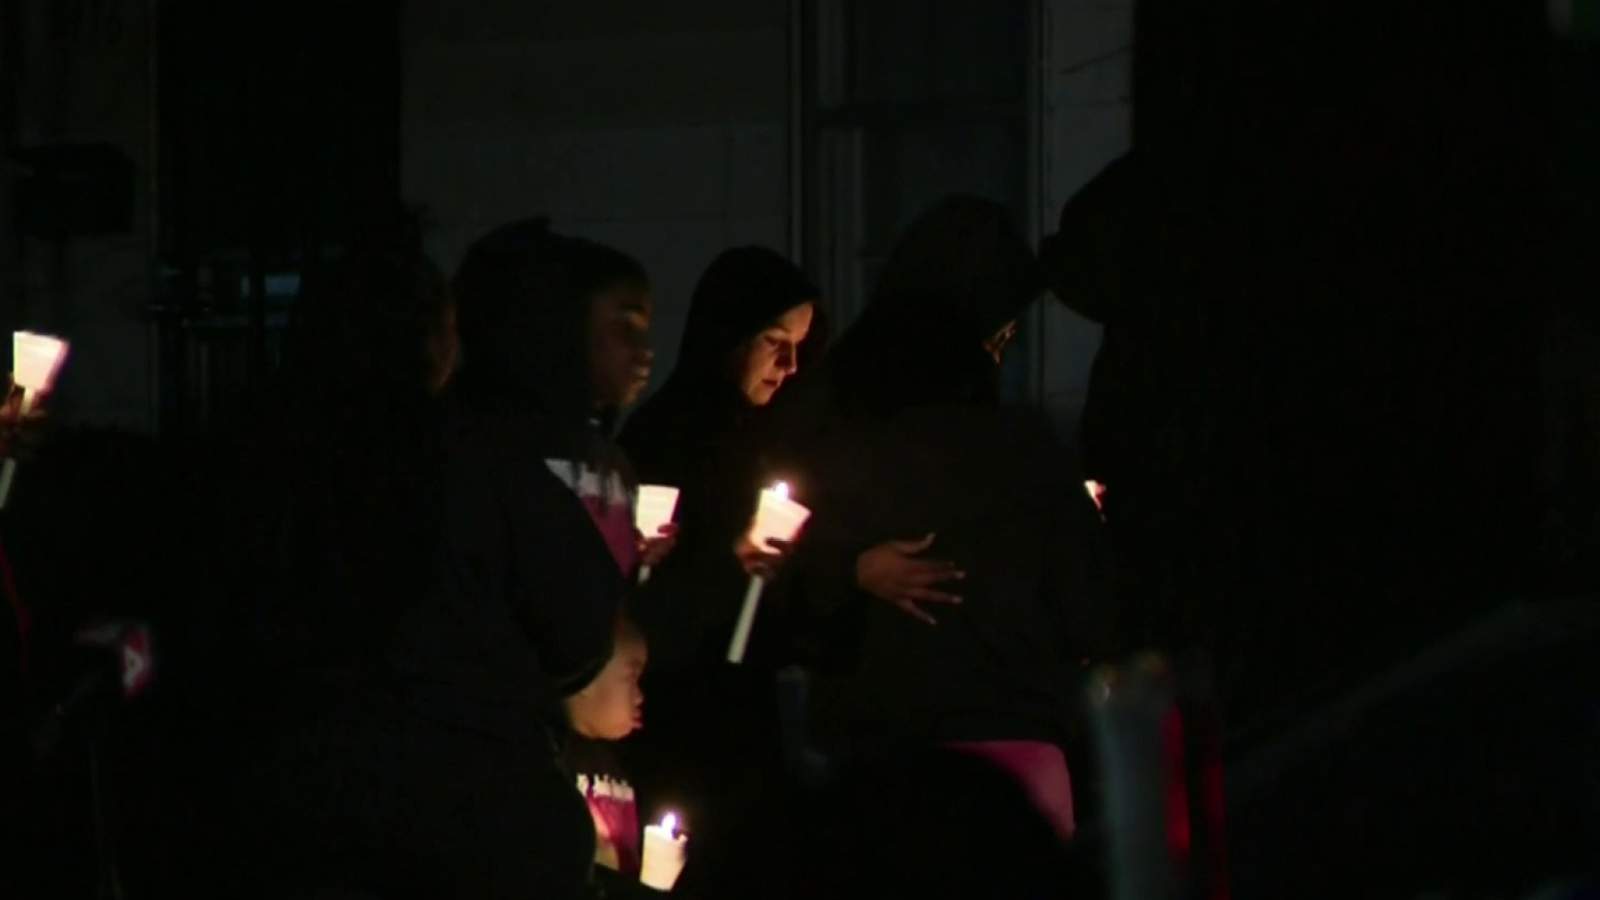 Family holds candlelight vigil, seeking justice for mother killed on Detroit’s west side